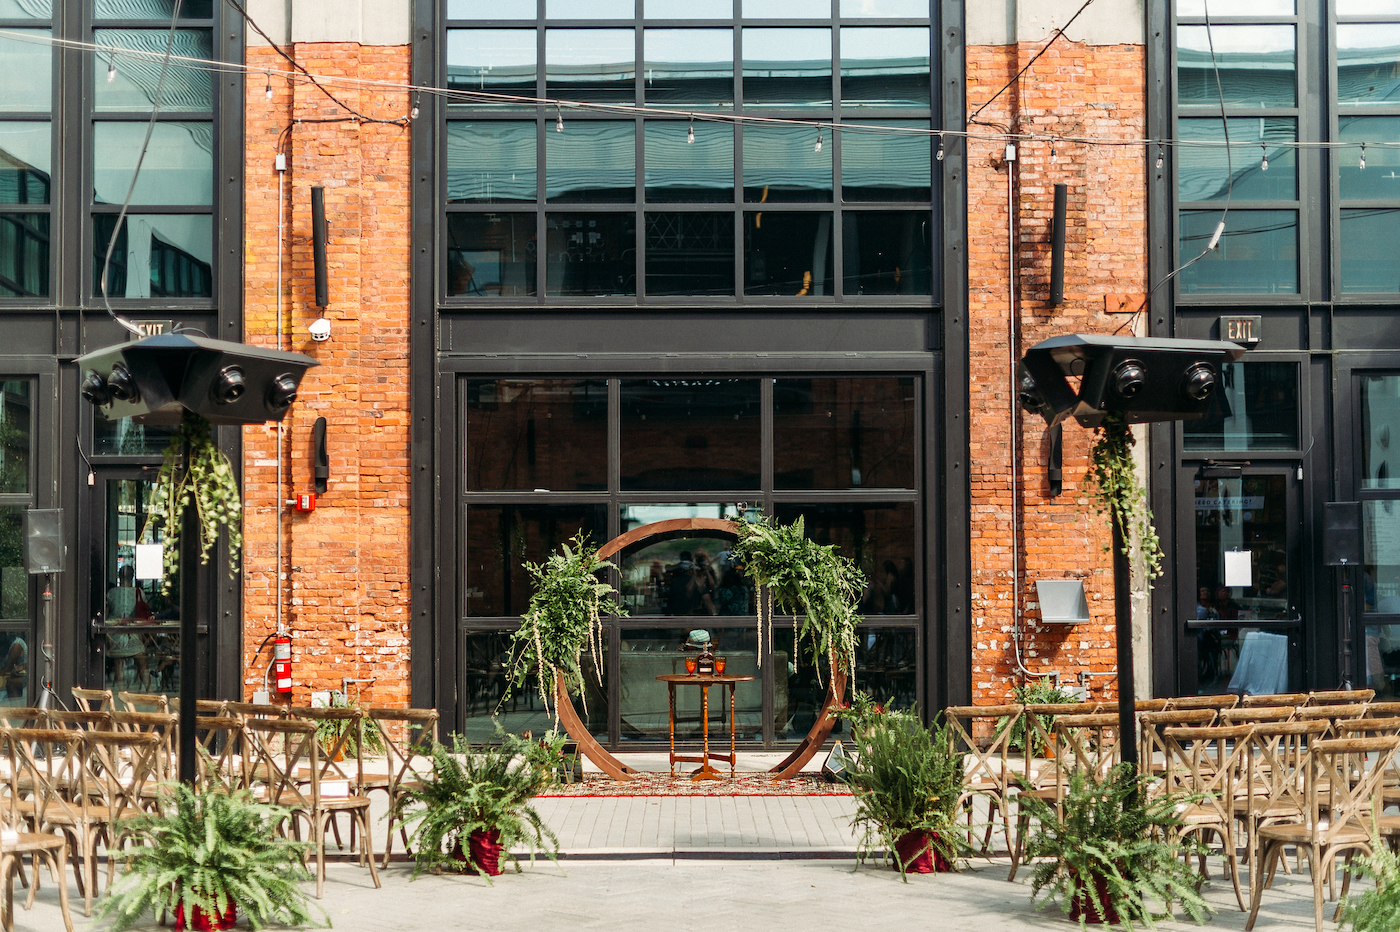 Tampa Wedding Armature Works Courtyard Ceremony with Canopy String Lights and Wood Cross Back Chairs and Round Moon Arch | Ceremony Aisle with Potted Ferns and Greenery Wedding Floral Arrangements | Outdoor Tampa Weddings